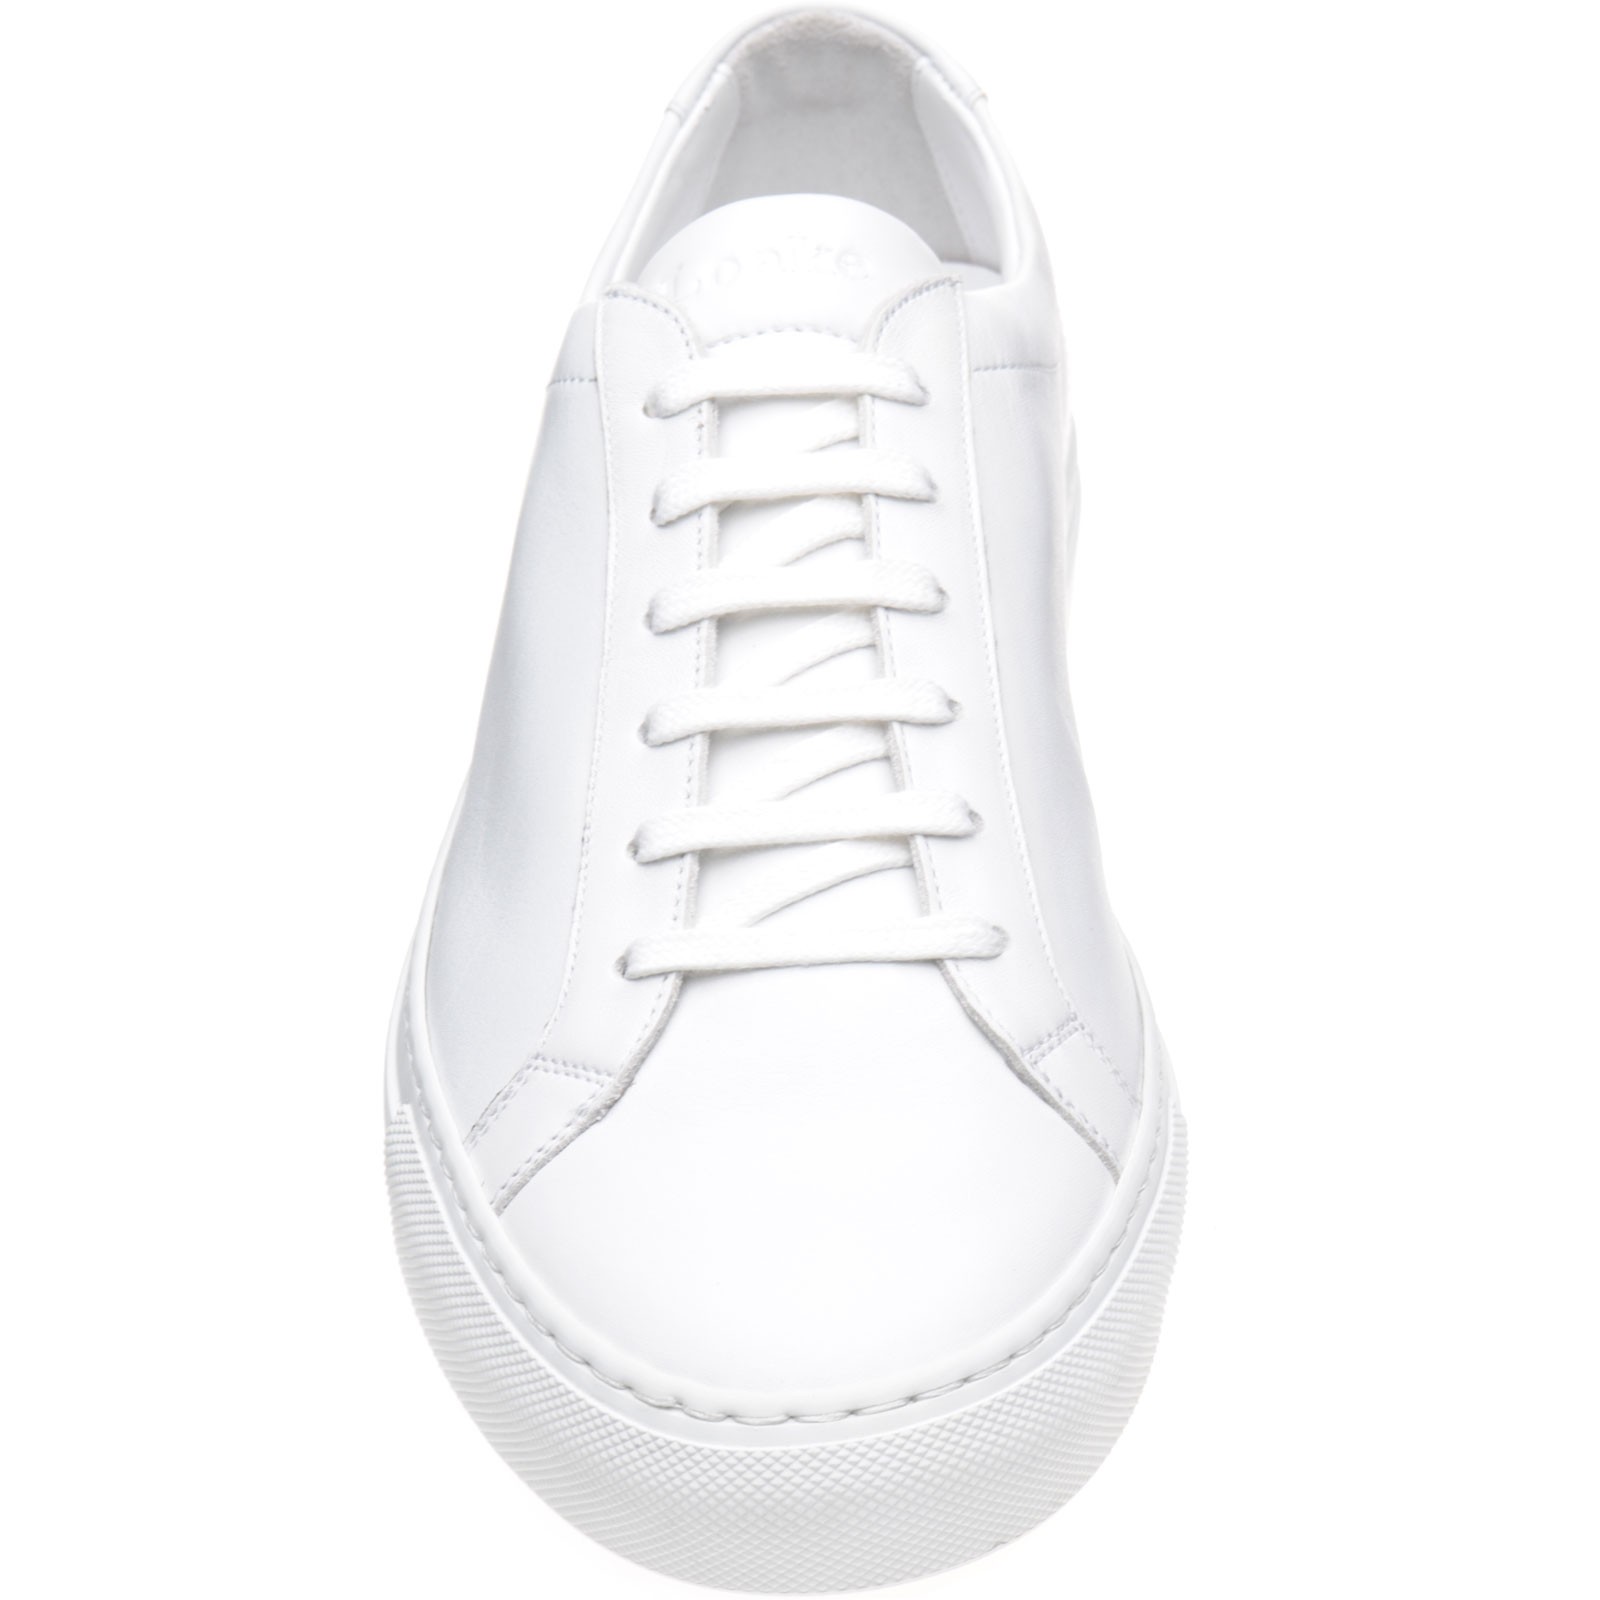 Loake shoes | Loake Design | Sprint rubber-soled in White Calf at ...